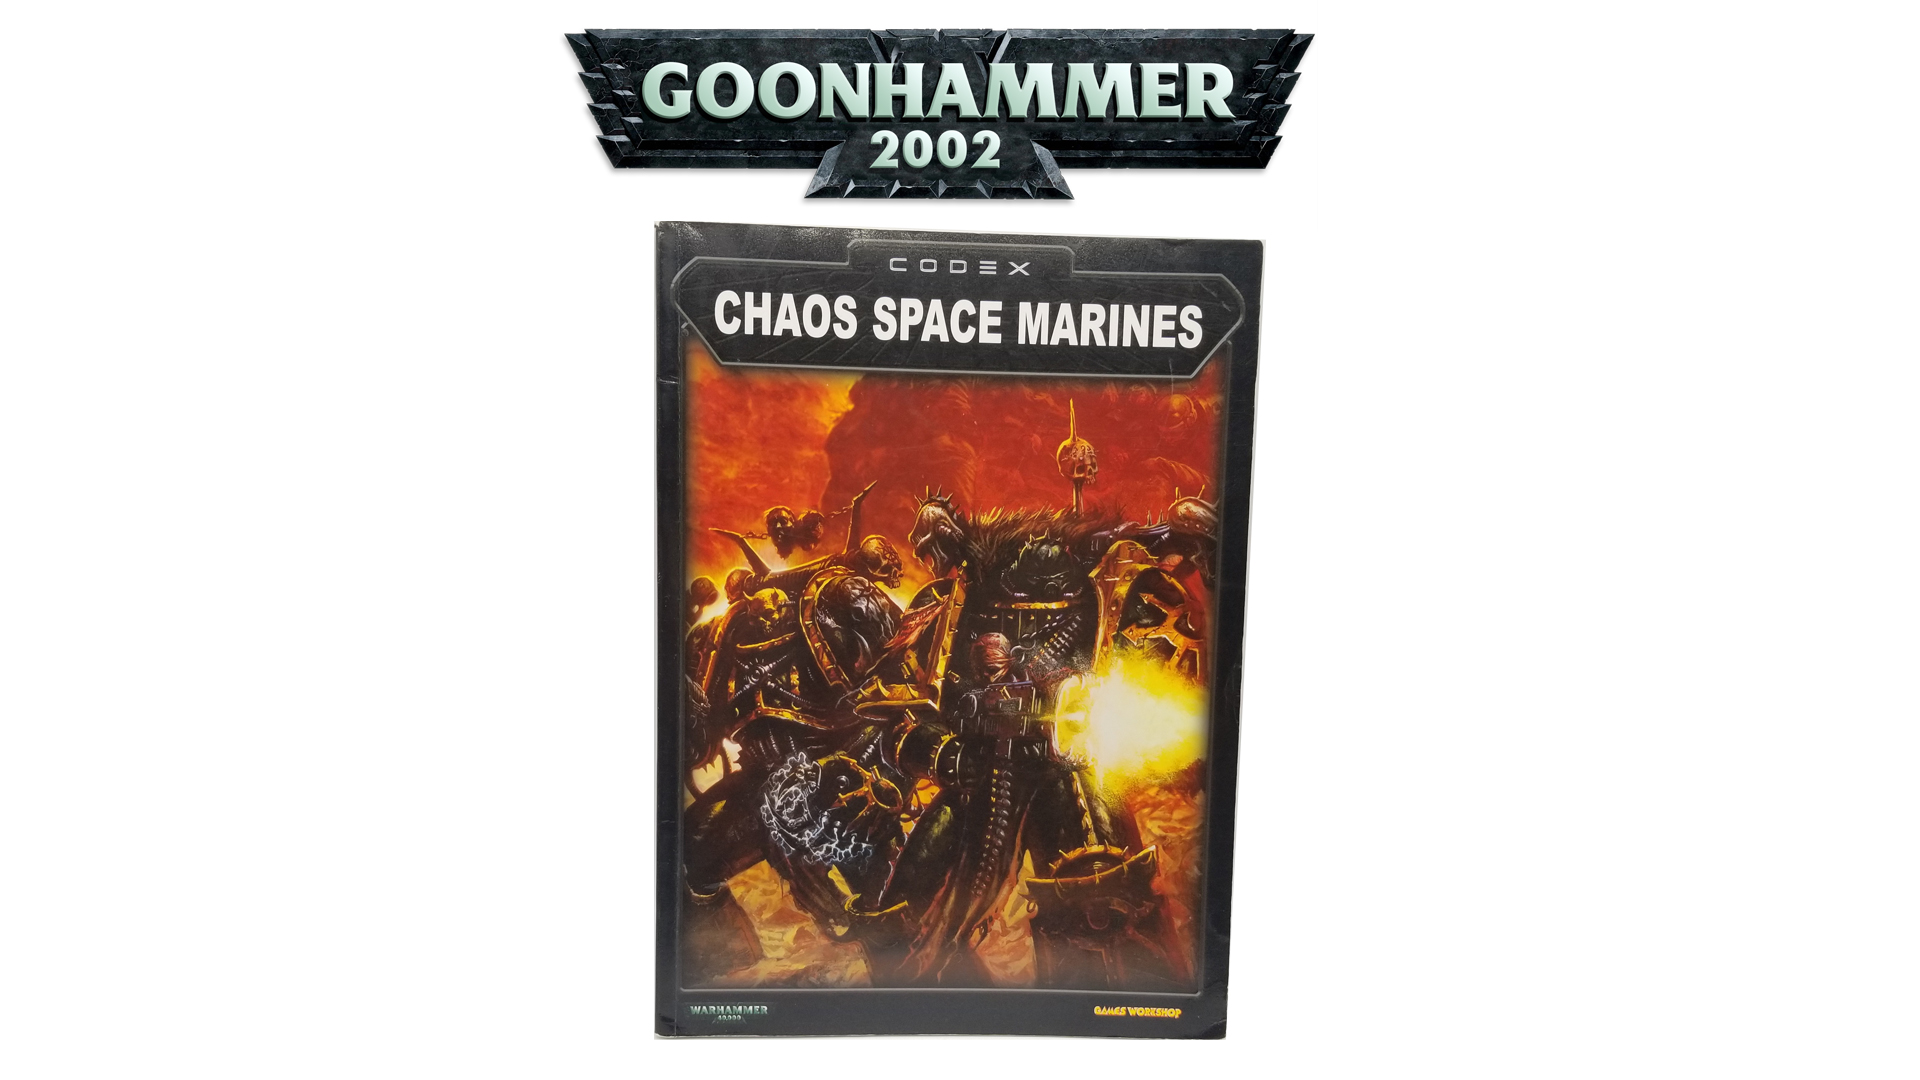 The Goonhammer Review of Codex: Thousand Sons (9th Edition)